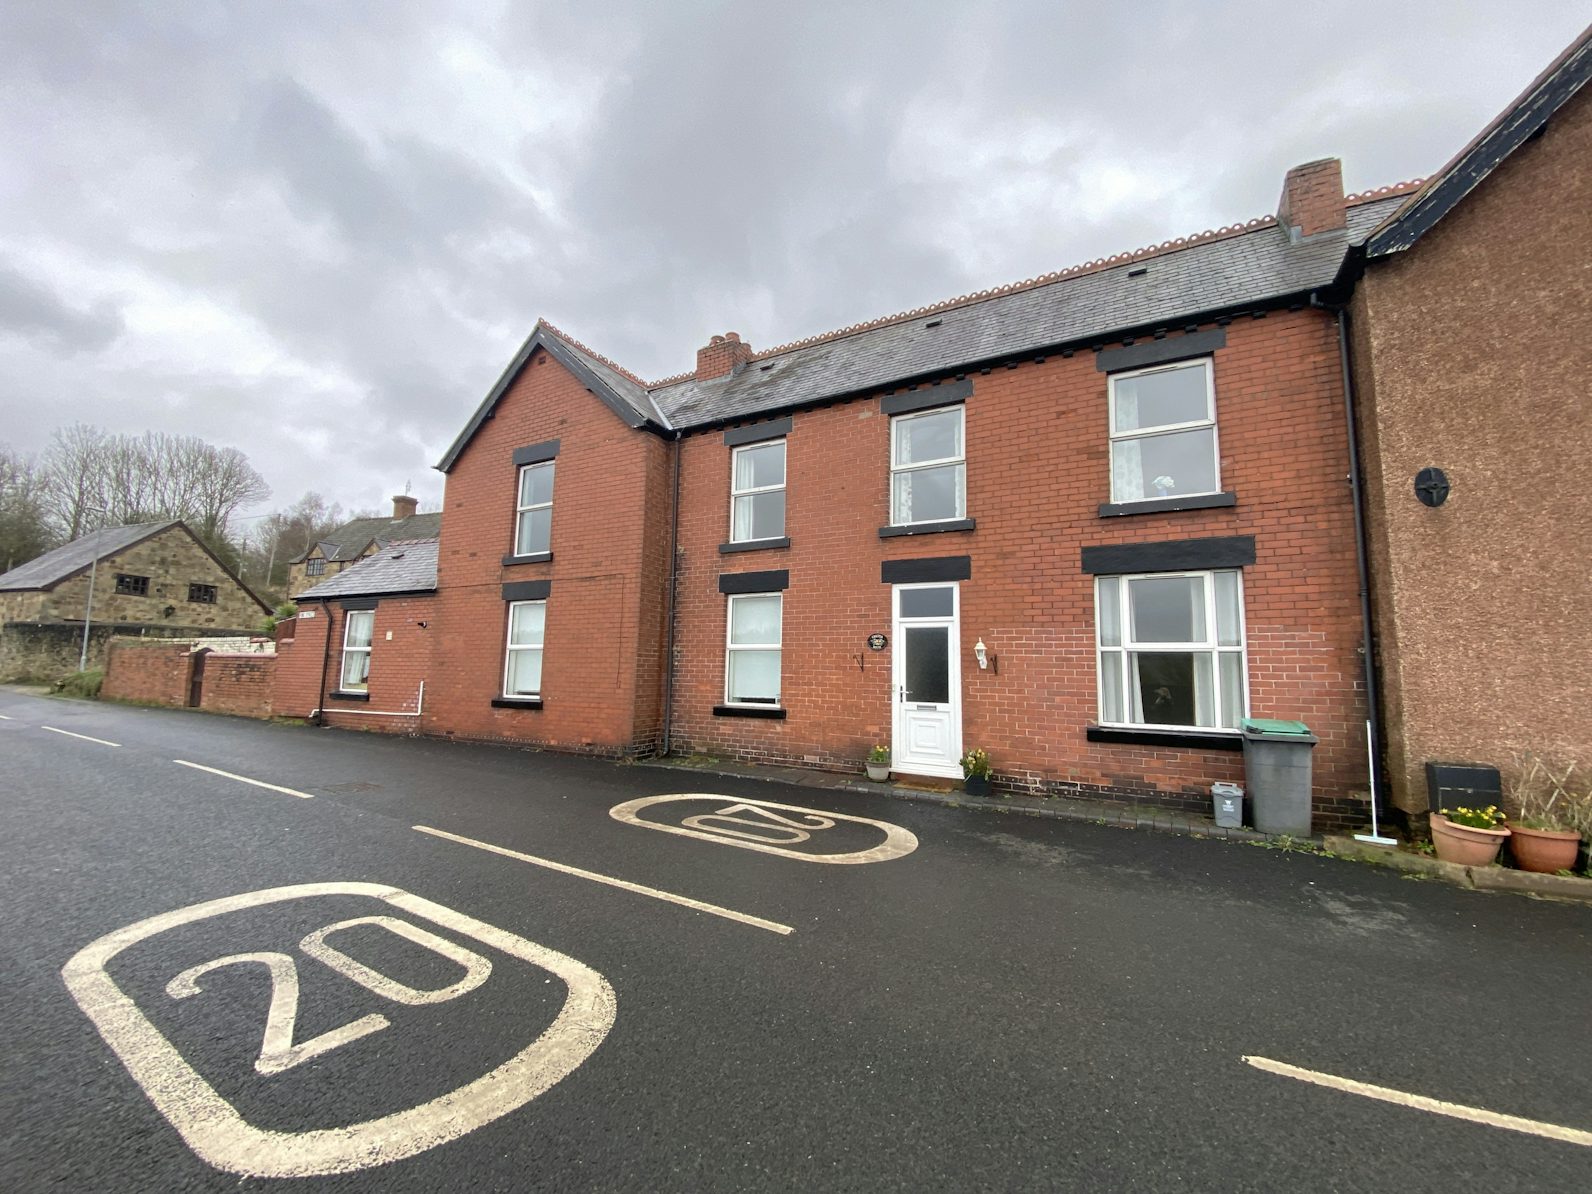 Semi-detached House for sale on King Street Cefn Mawr, LL14